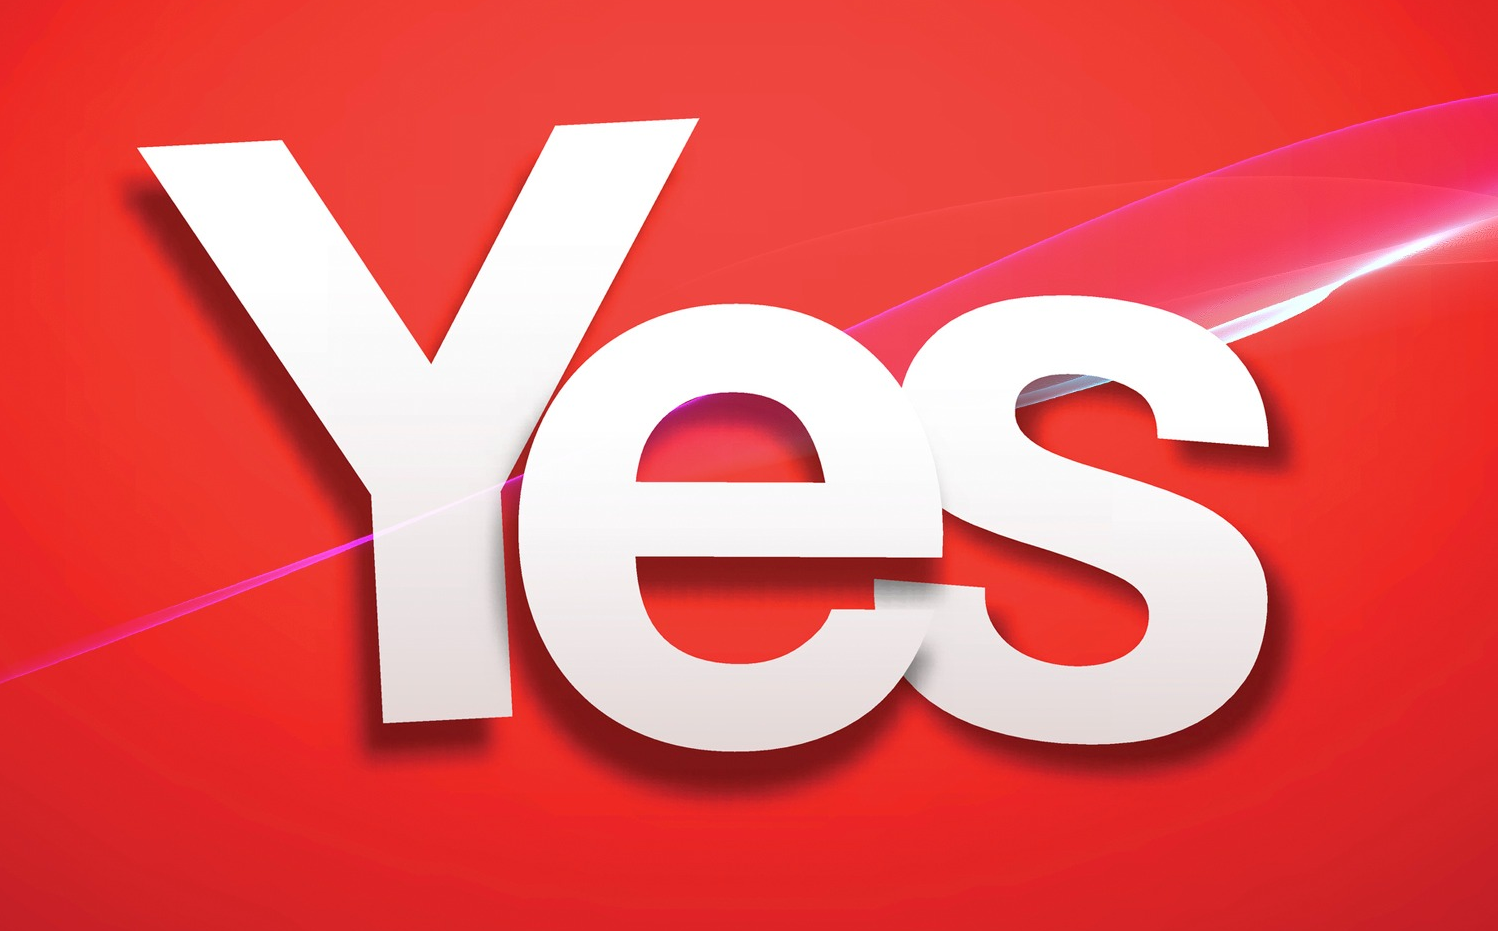 How to Get Your Boss to Say “Yes”